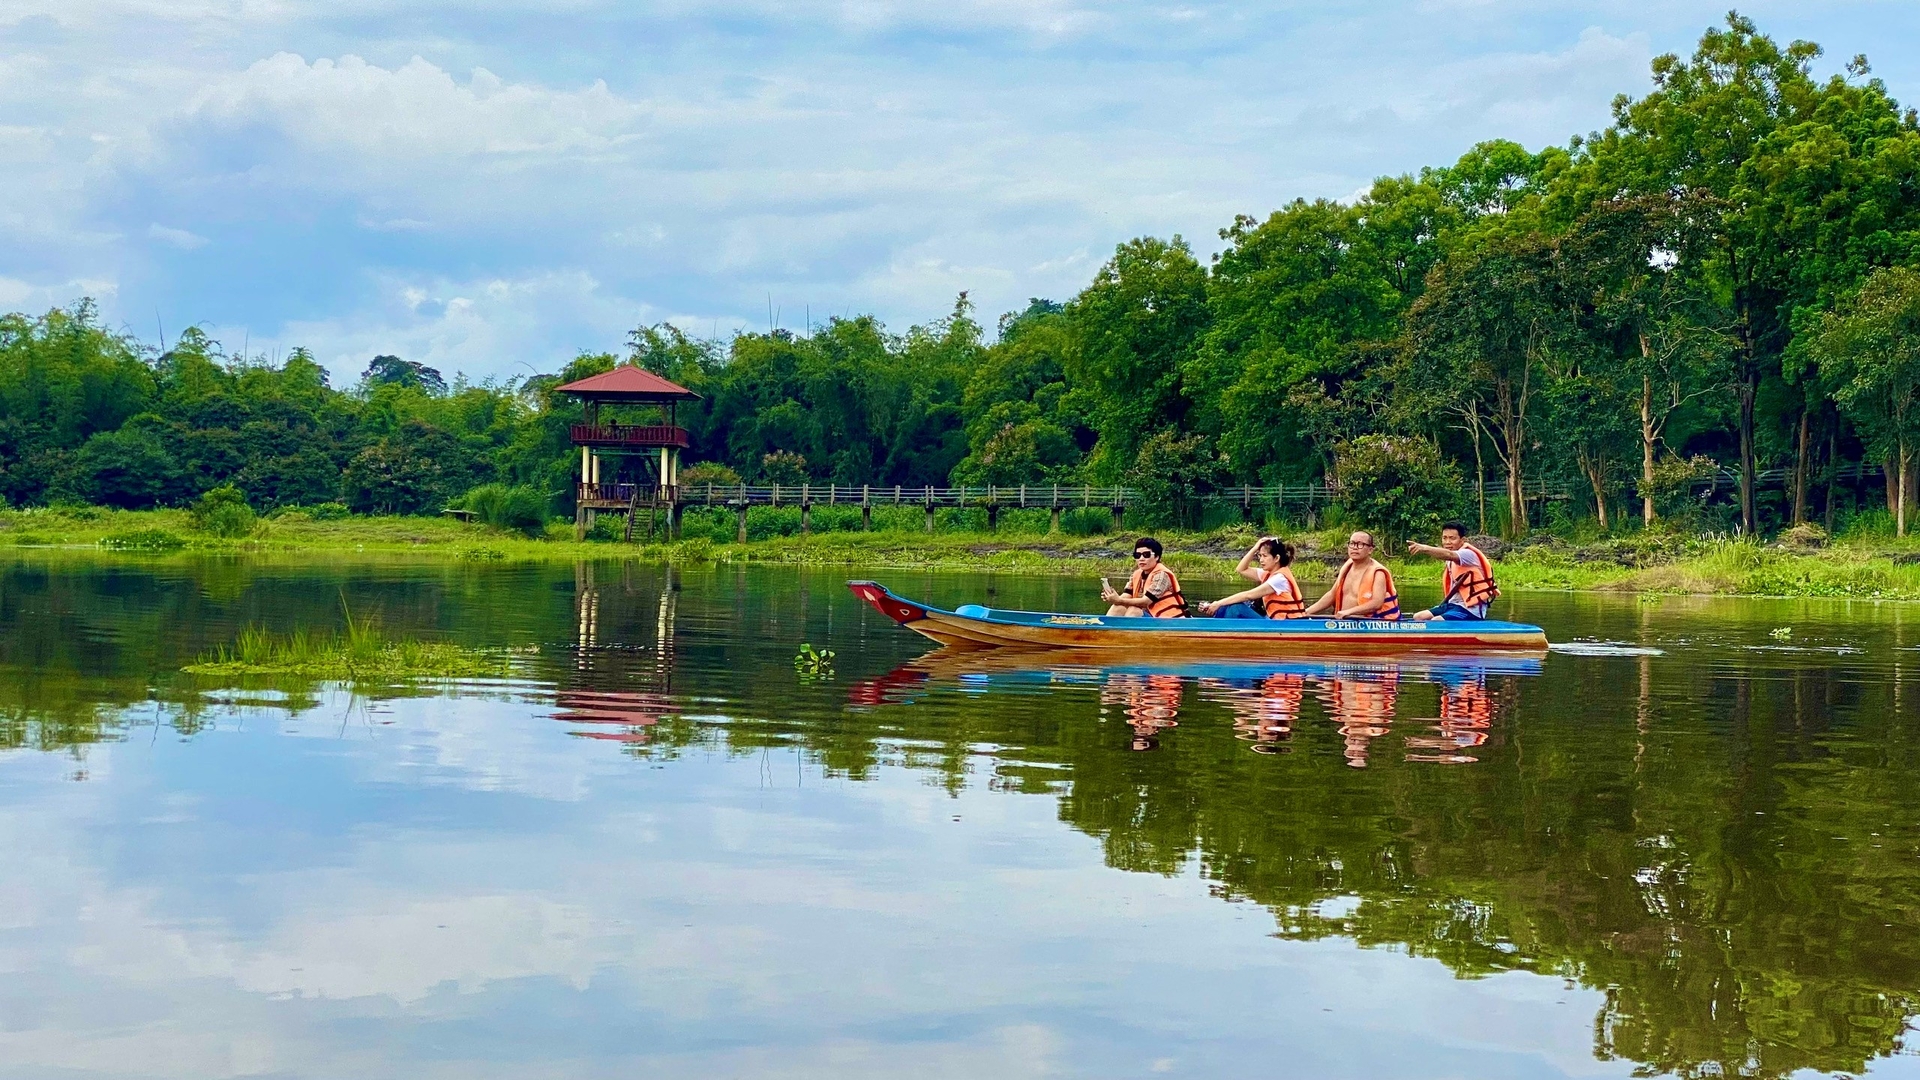 Vietnam promotes conservation and enhancement of biodiversity through greener approaches to land and natural resources. Photo: VAN.